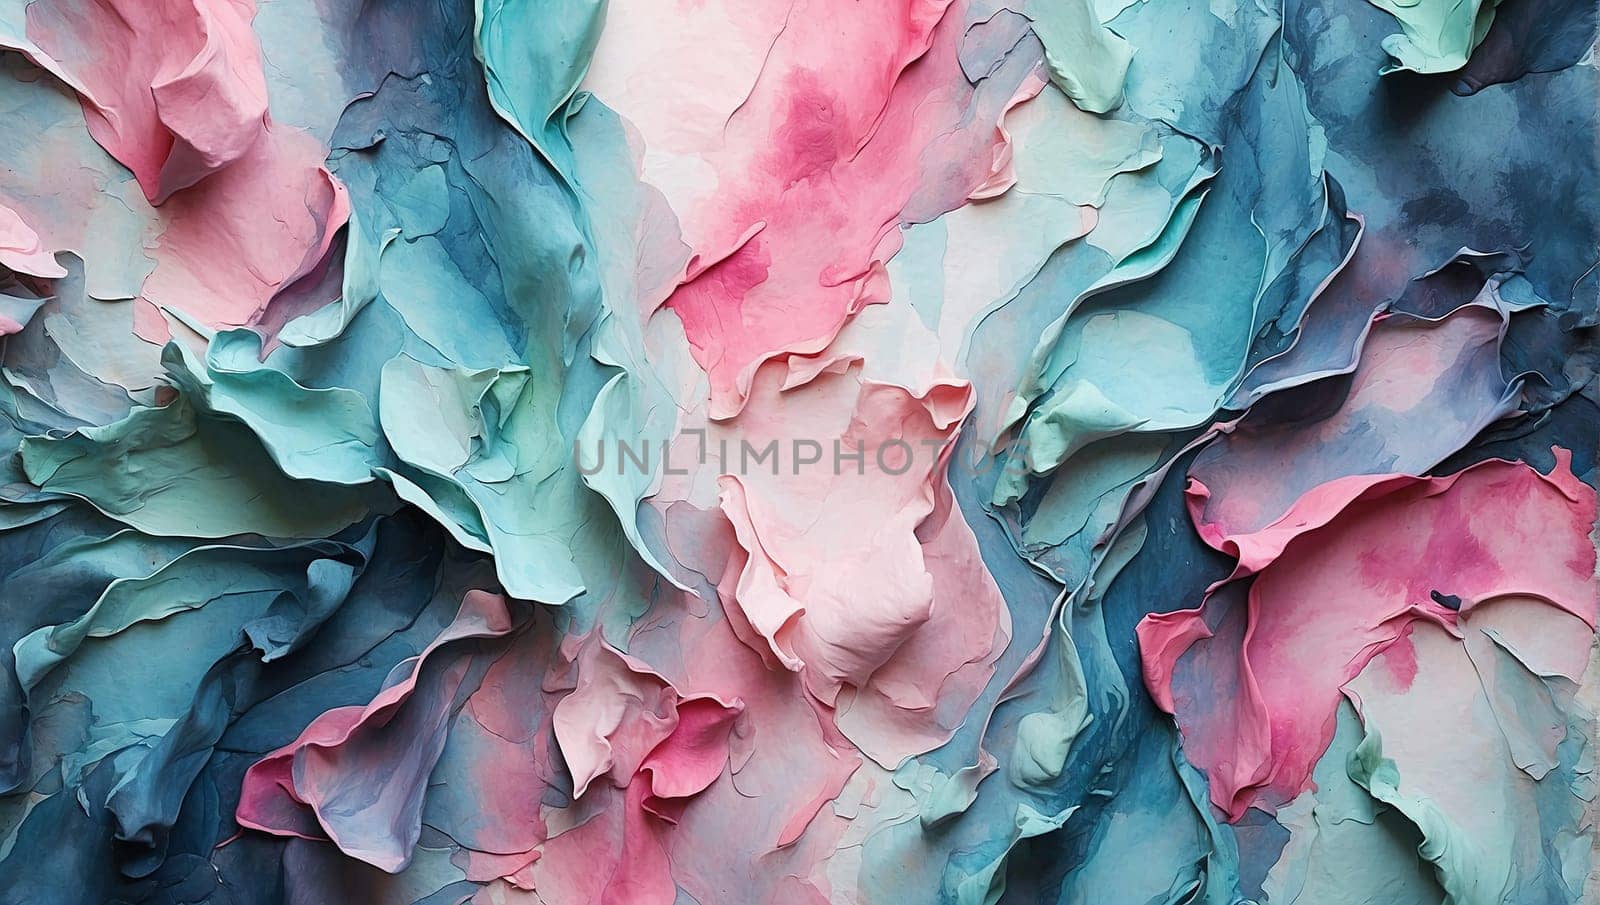 blue-pink texture, blue-green, abstract background, abstract watercolor,